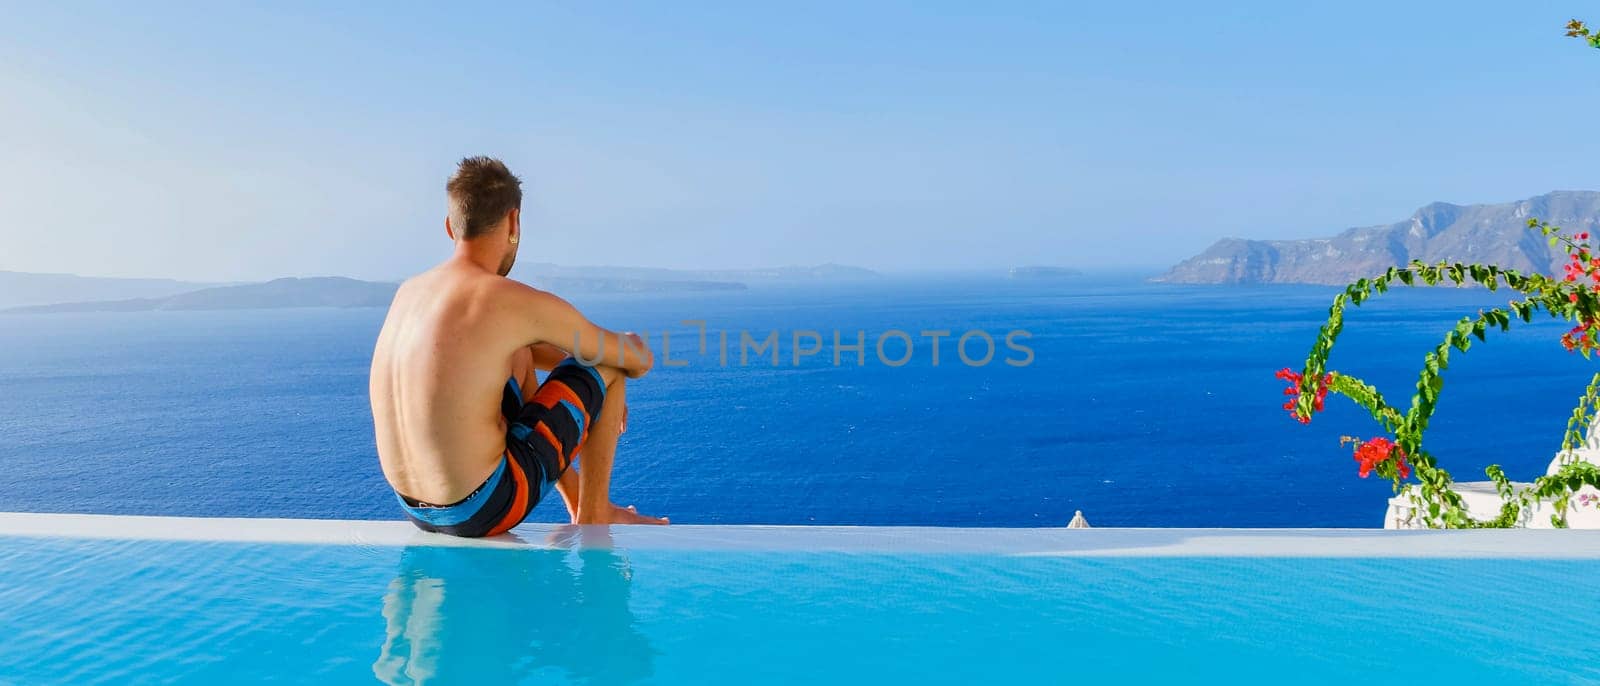 men relaxing in swimming pool during vacation at Santorini infinity looking out over the ocean by fokkebok